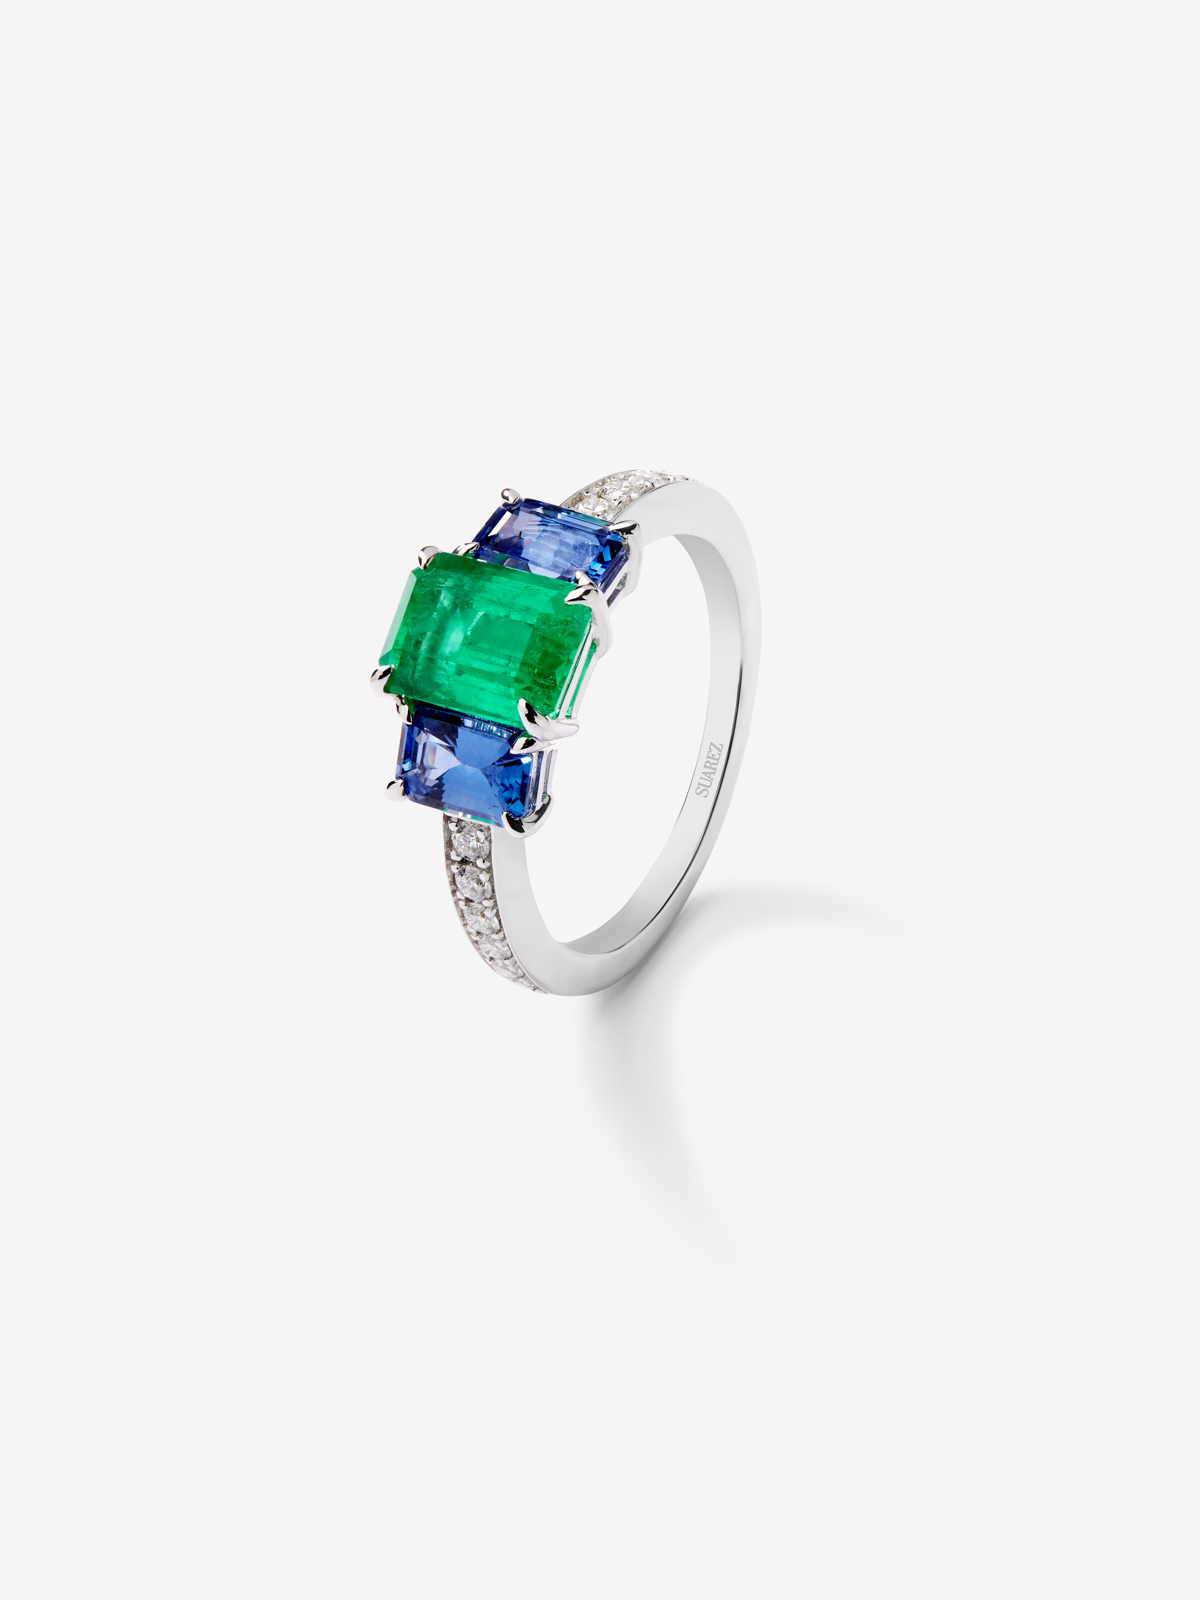 18K White Gold Tieillo Ring with Green Esmerald in Octagonal Size 1.88 CTS, Blue Sapphires in Octagonal Size 1.14 CTS and White Diamonds in Bright Size of 0.02 Cts